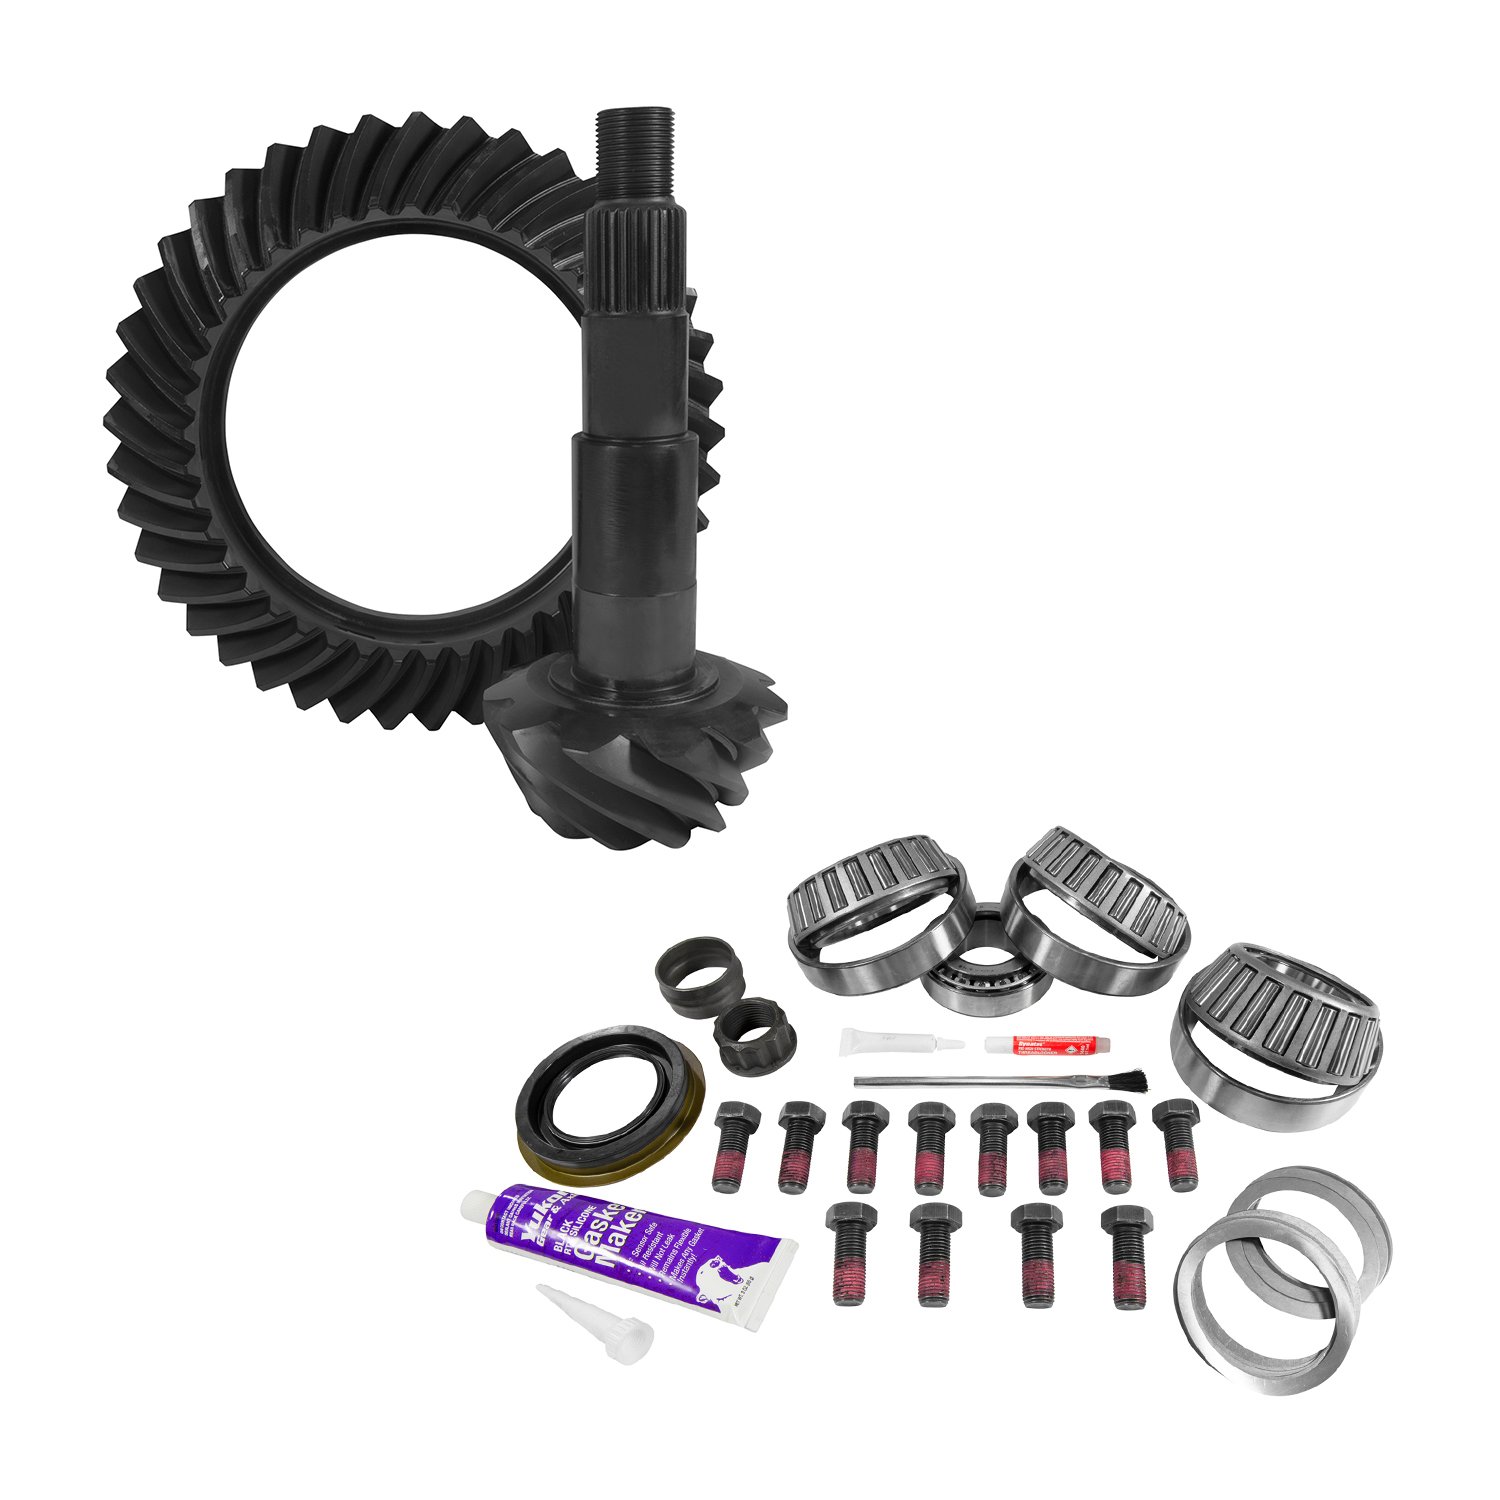 USA Standard 10827 11.5 in. Aam 4.56 Rear Ring & Pinion Install Kit, 4.375 in. Od Pinion Bearing